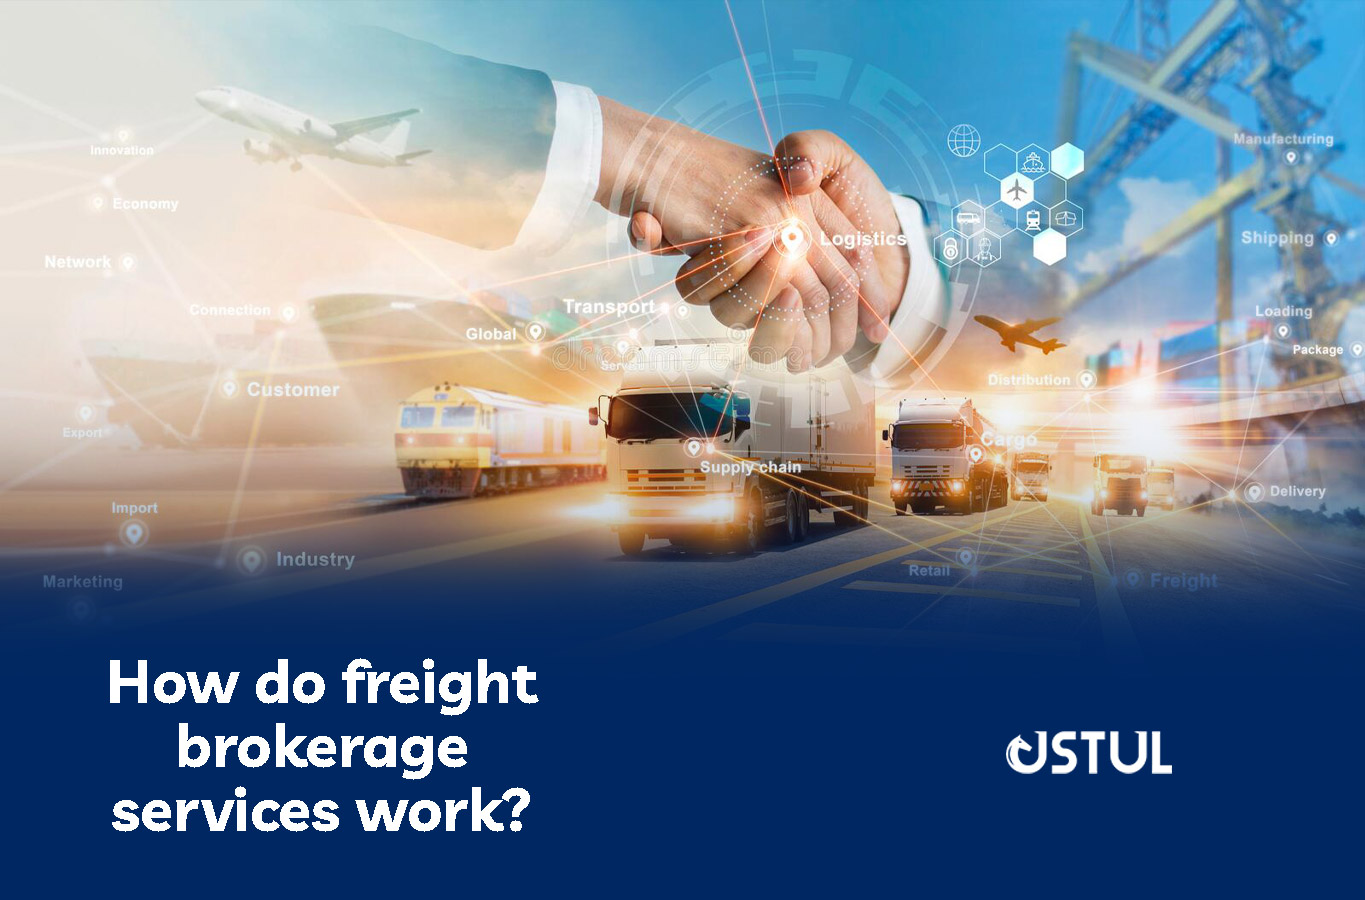 How Do Freight Brokerage Services Work?